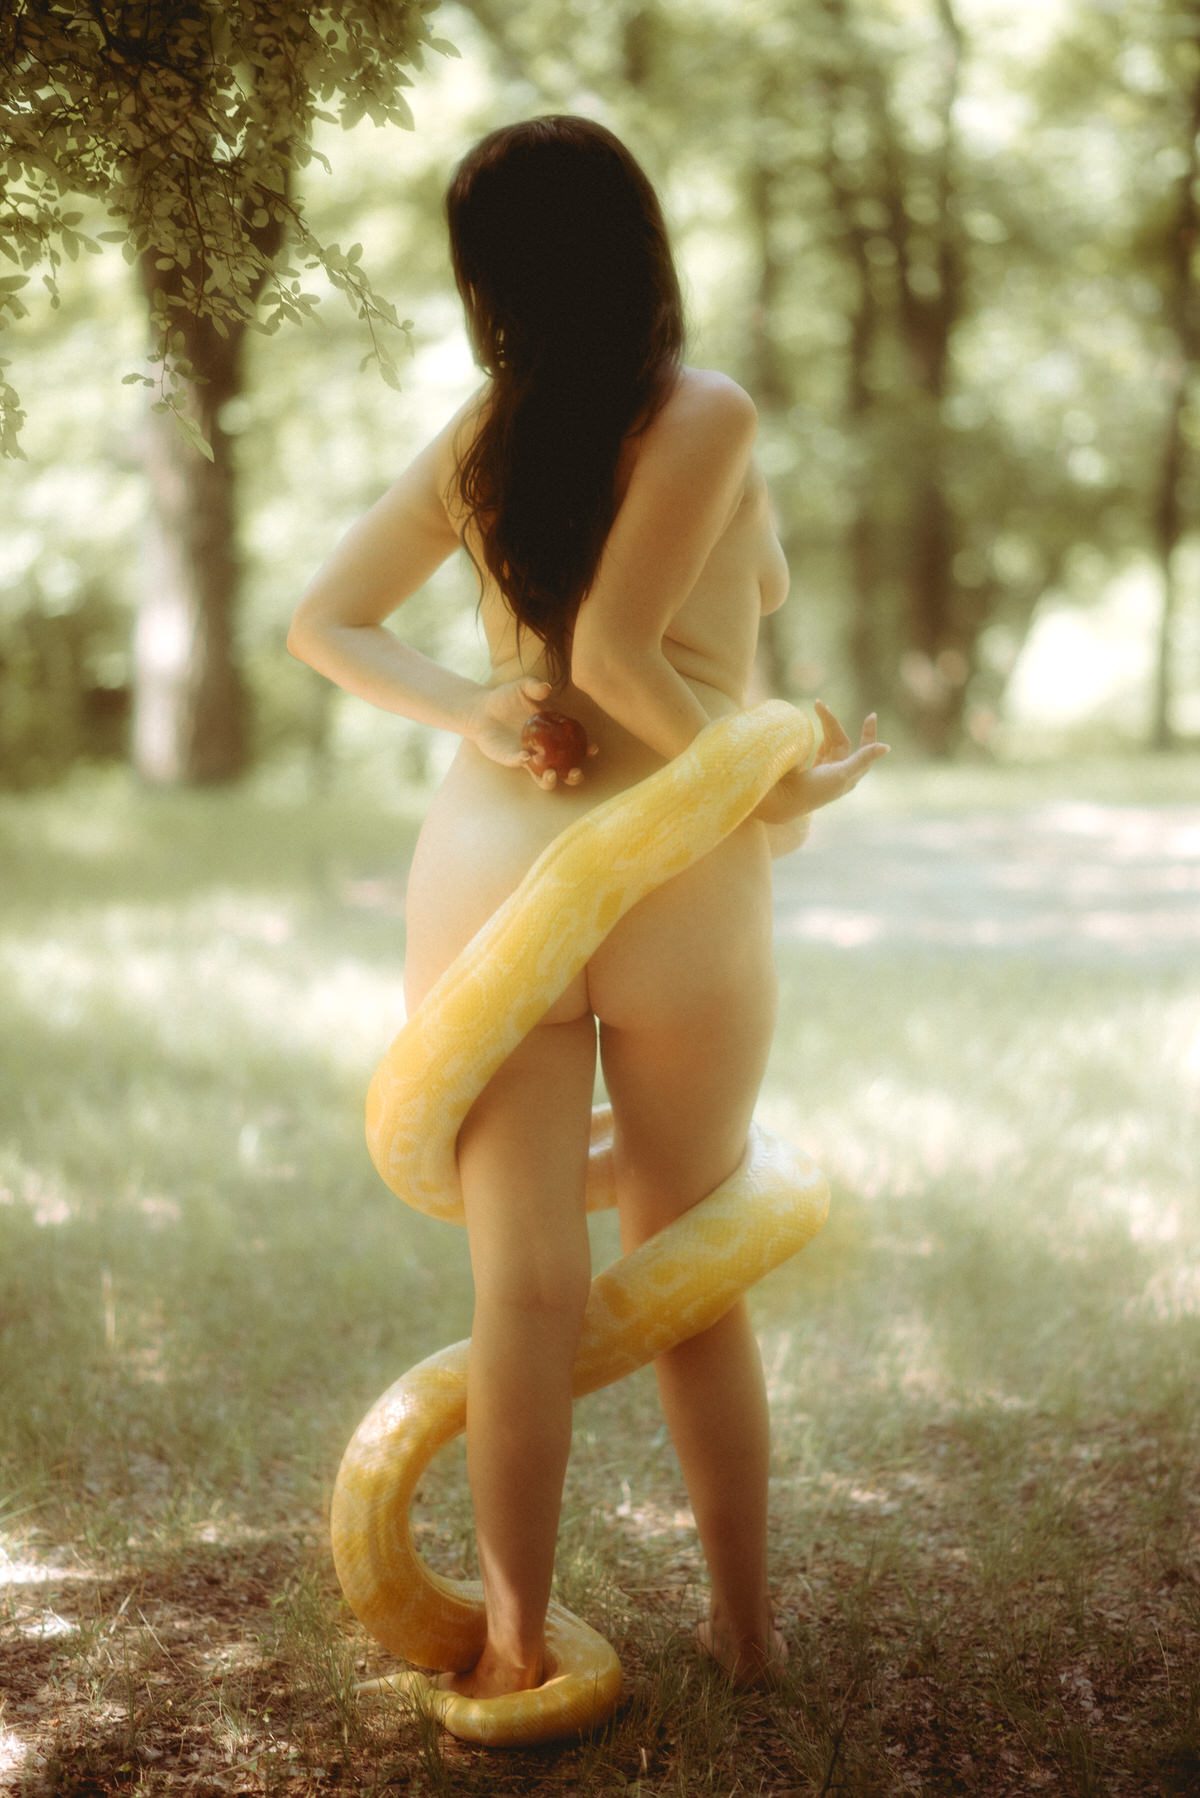 A naked woman turned around in the woods while holding a red apple behind her back and a huge yellow snake is wrapped around her entire body.